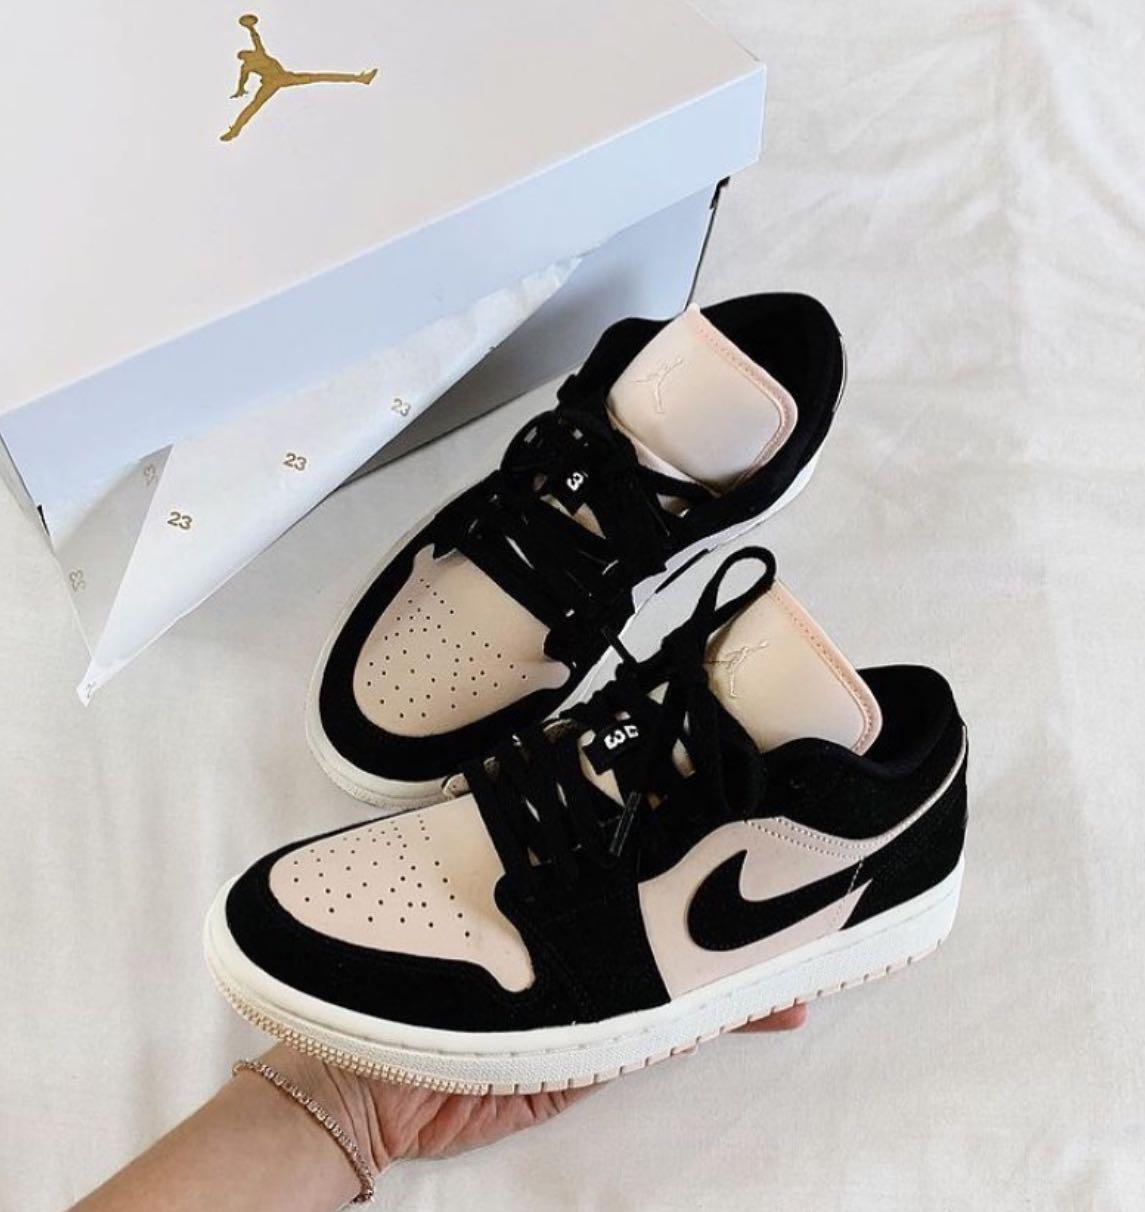 Nike Air Jordan 1 Low Black Guava Ice Women S Fashion Shoes Sneakers On Carousell